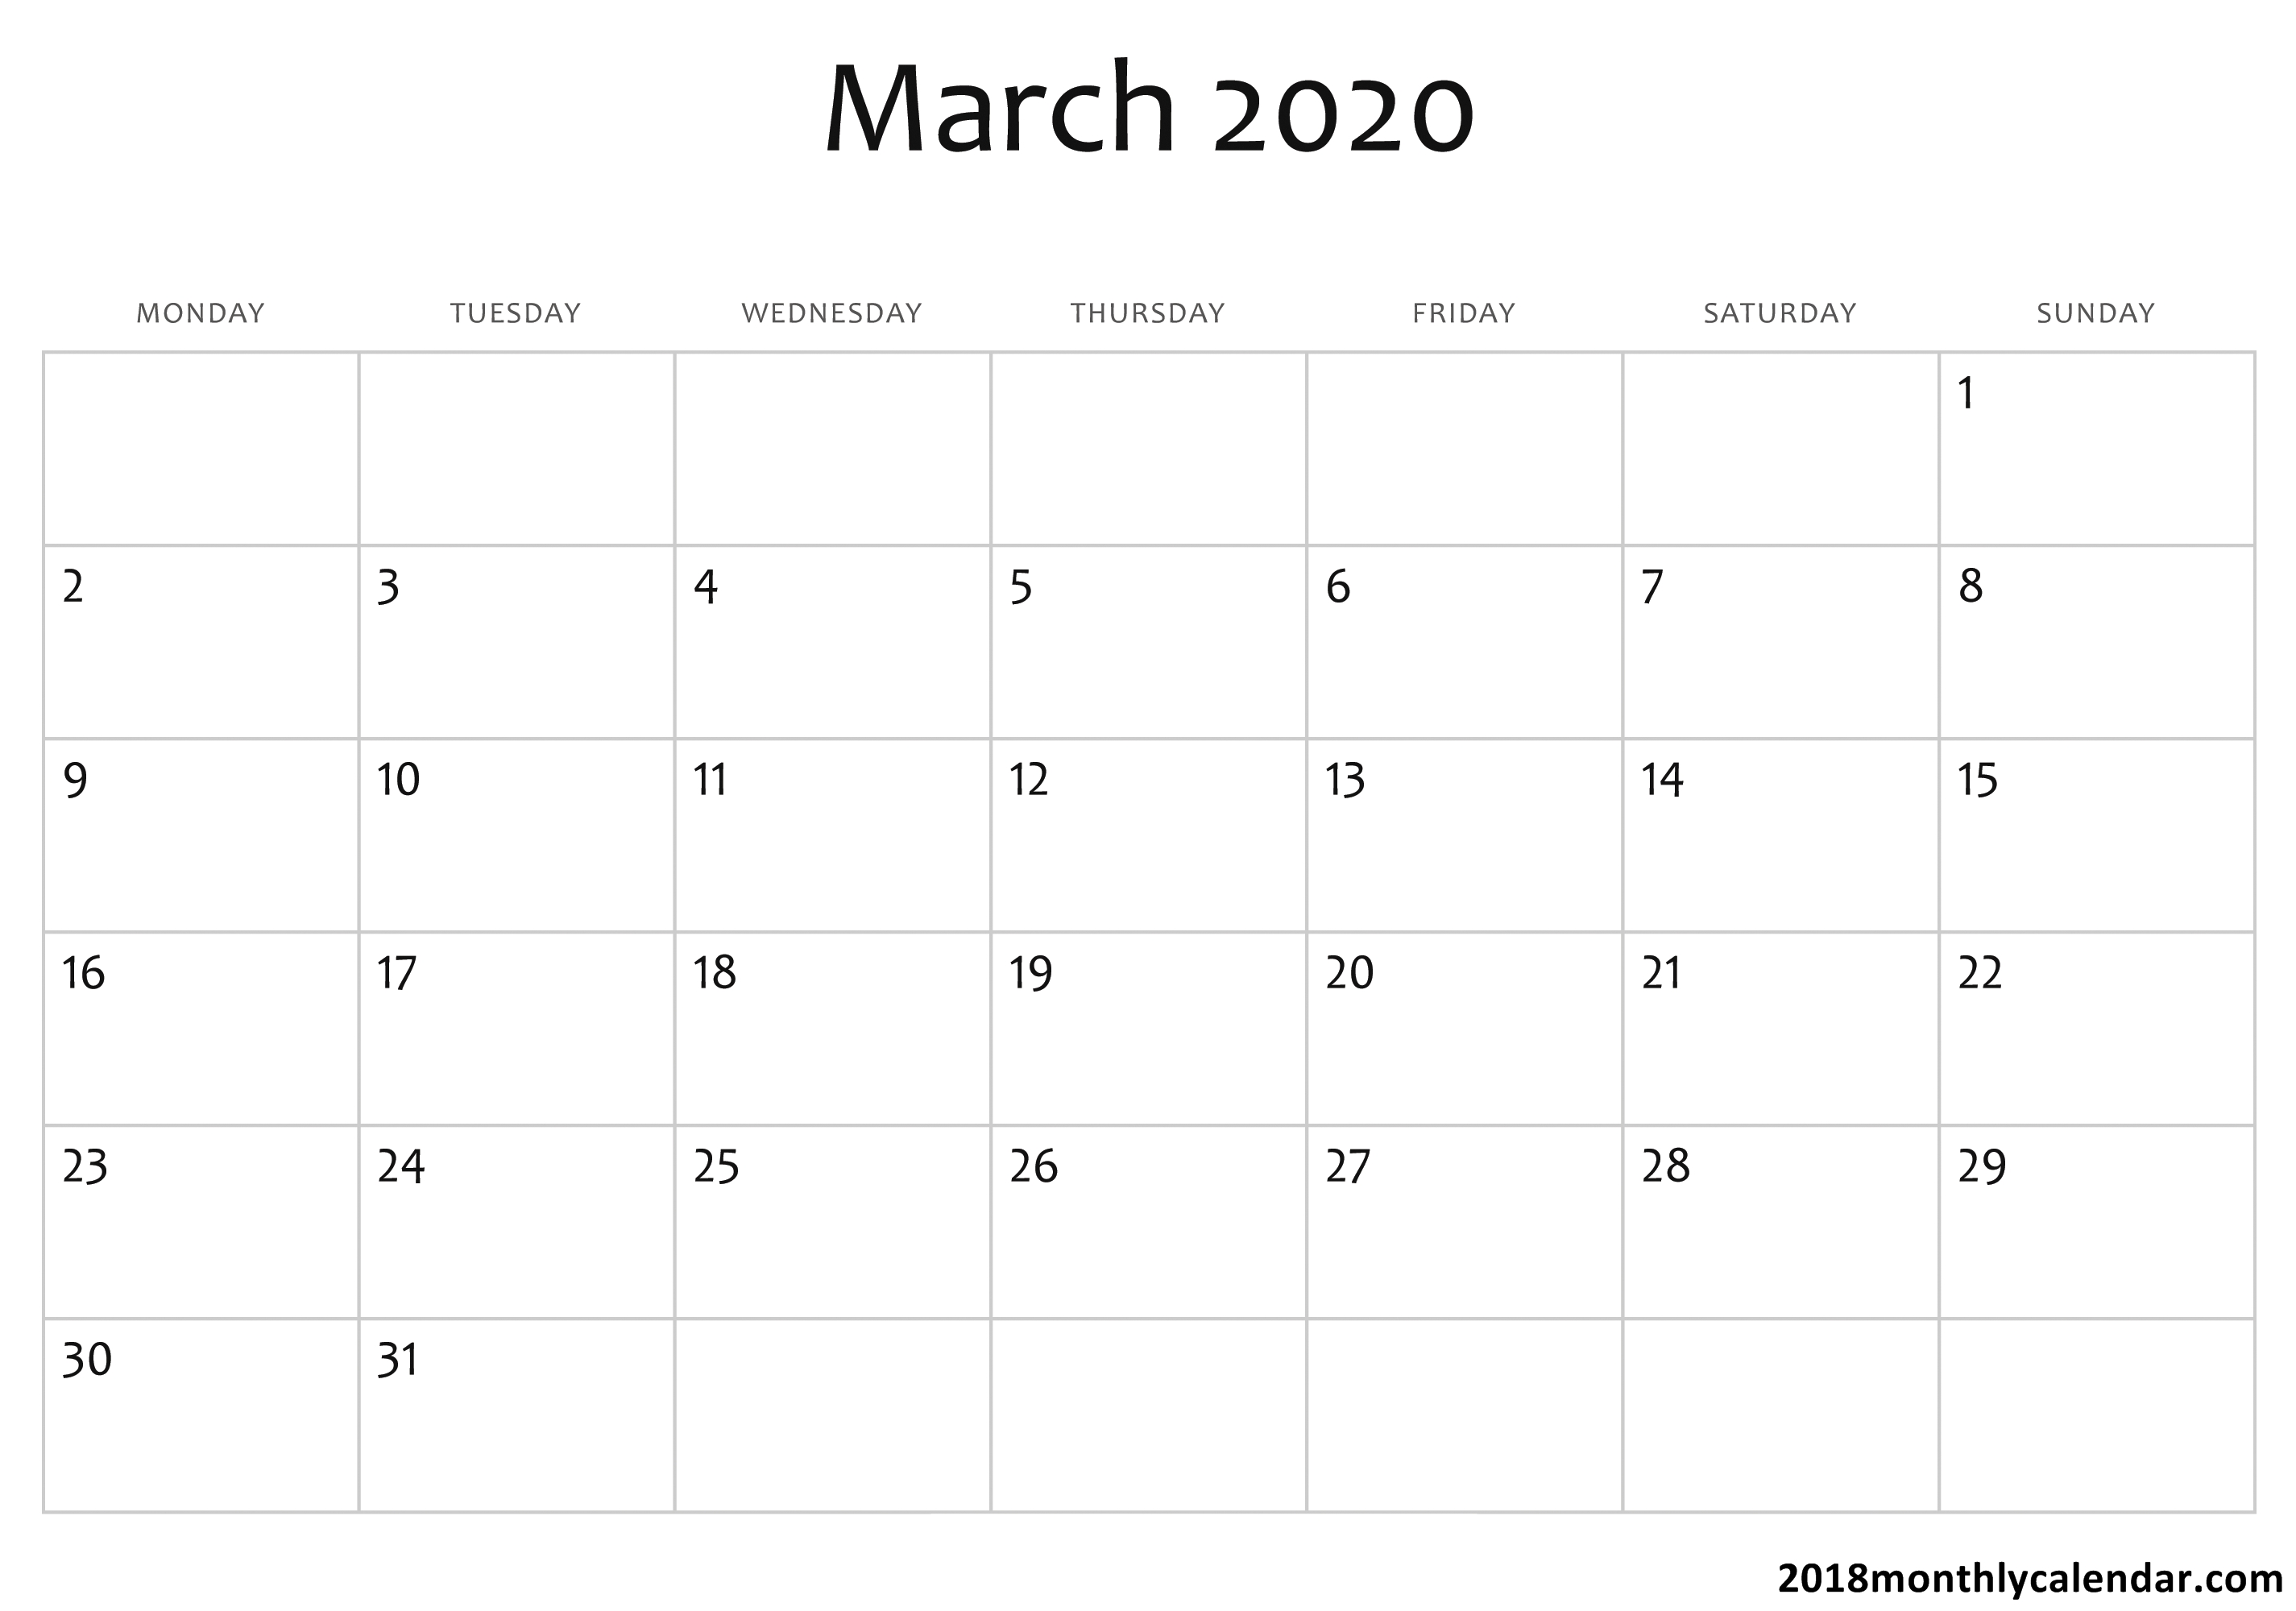 Download March 2020 Calendar – Blank &amp; Editable within Blank 2020 Calendars To Edit